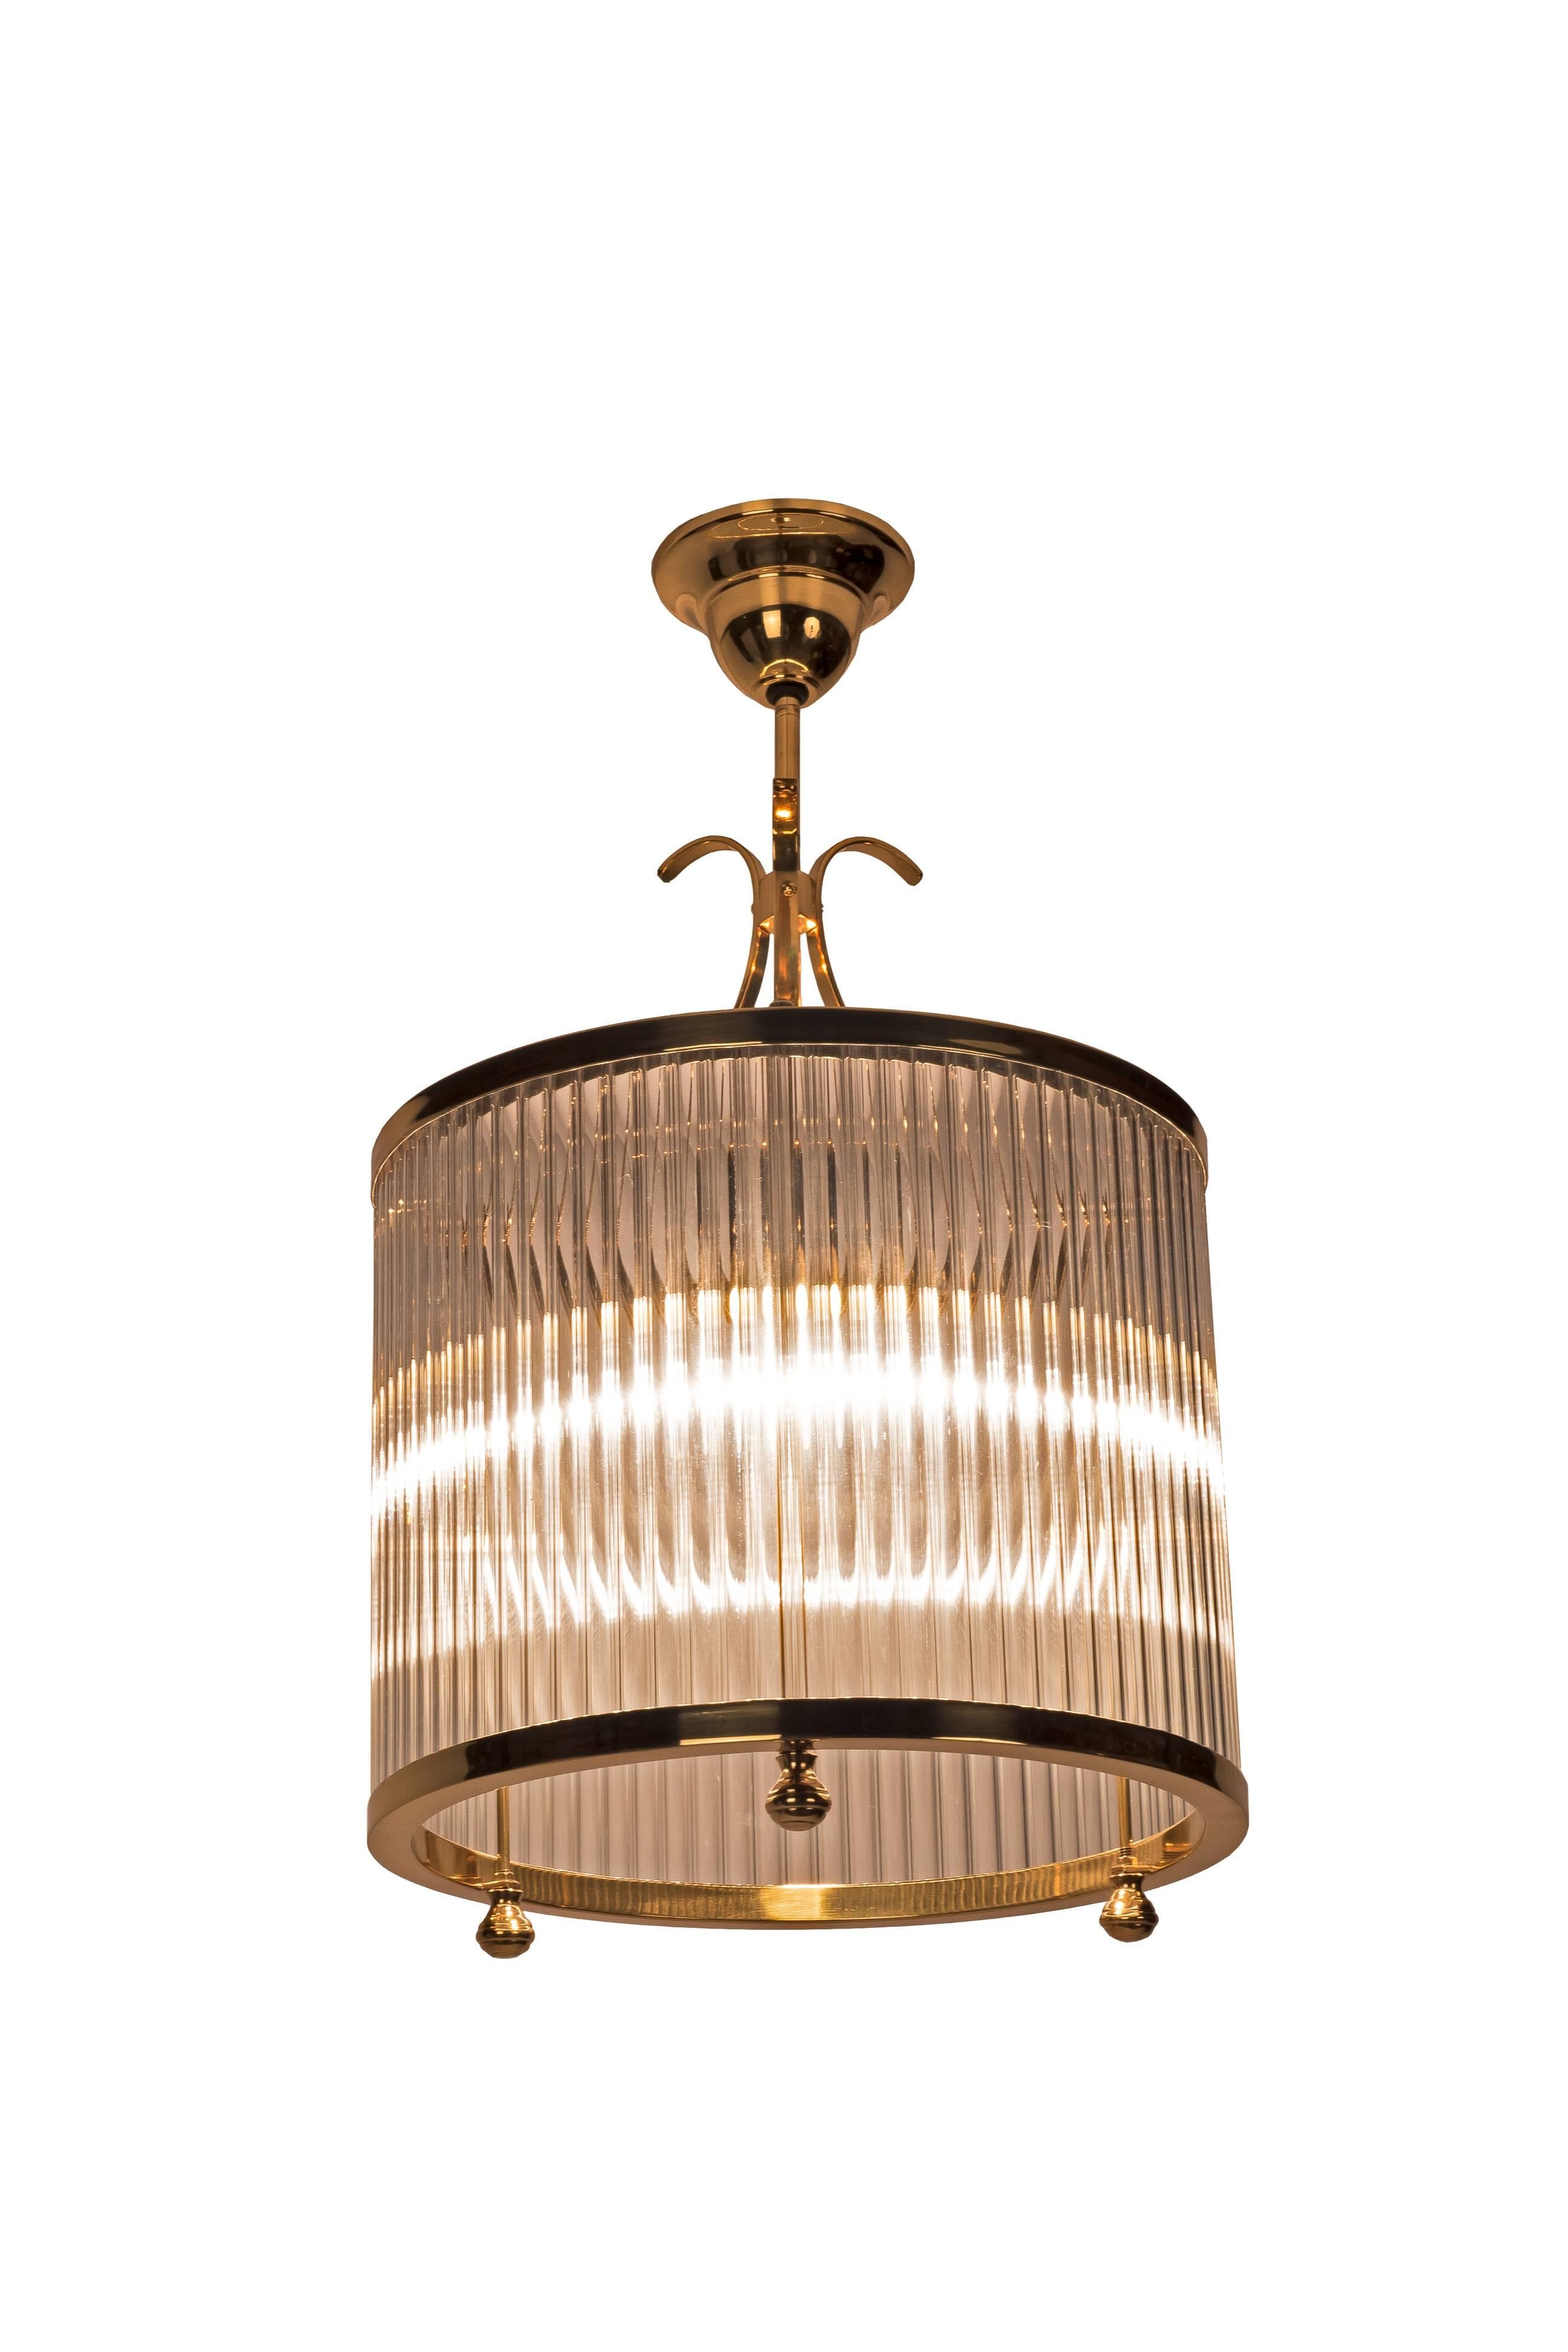 This Luxe cylindrical Art Deco chandelier in the style of Petitot features a polished brass frame with tubular glass inserts. Brass has been newly polished and piece rewired to American standards.